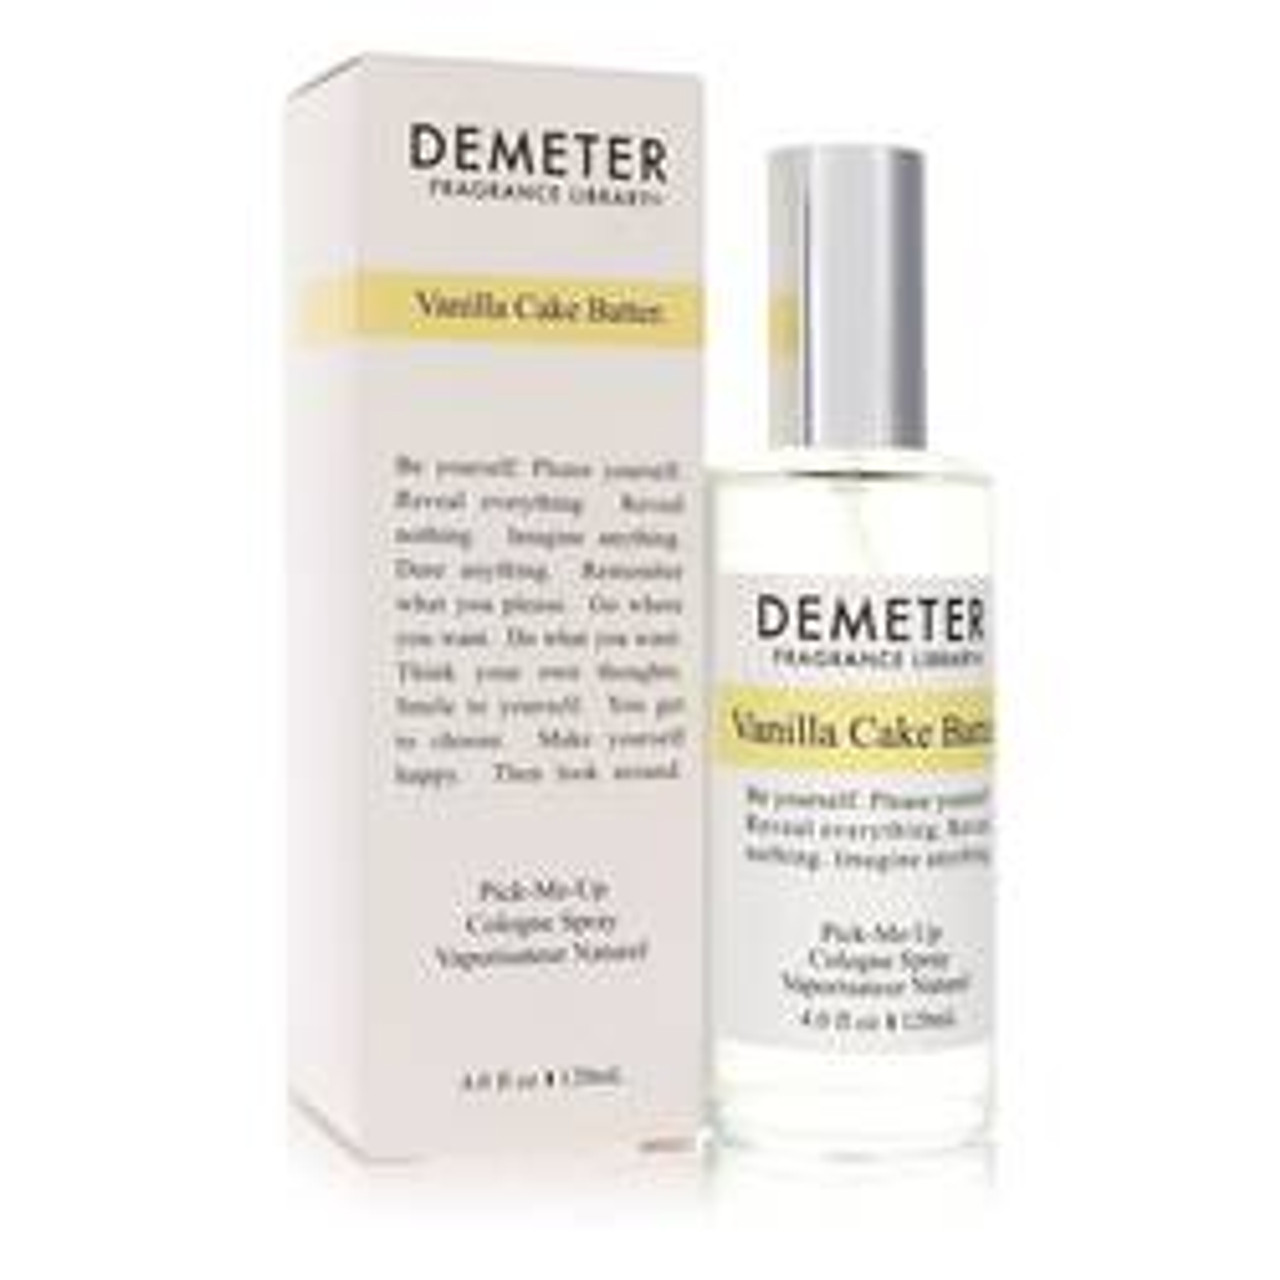 Demeter Vanilla Cake Batter Perfume By Demeter Cologne Spray 4 oz for Women - [From 79.50 - Choose pk Qty ] - *Ships from Miami